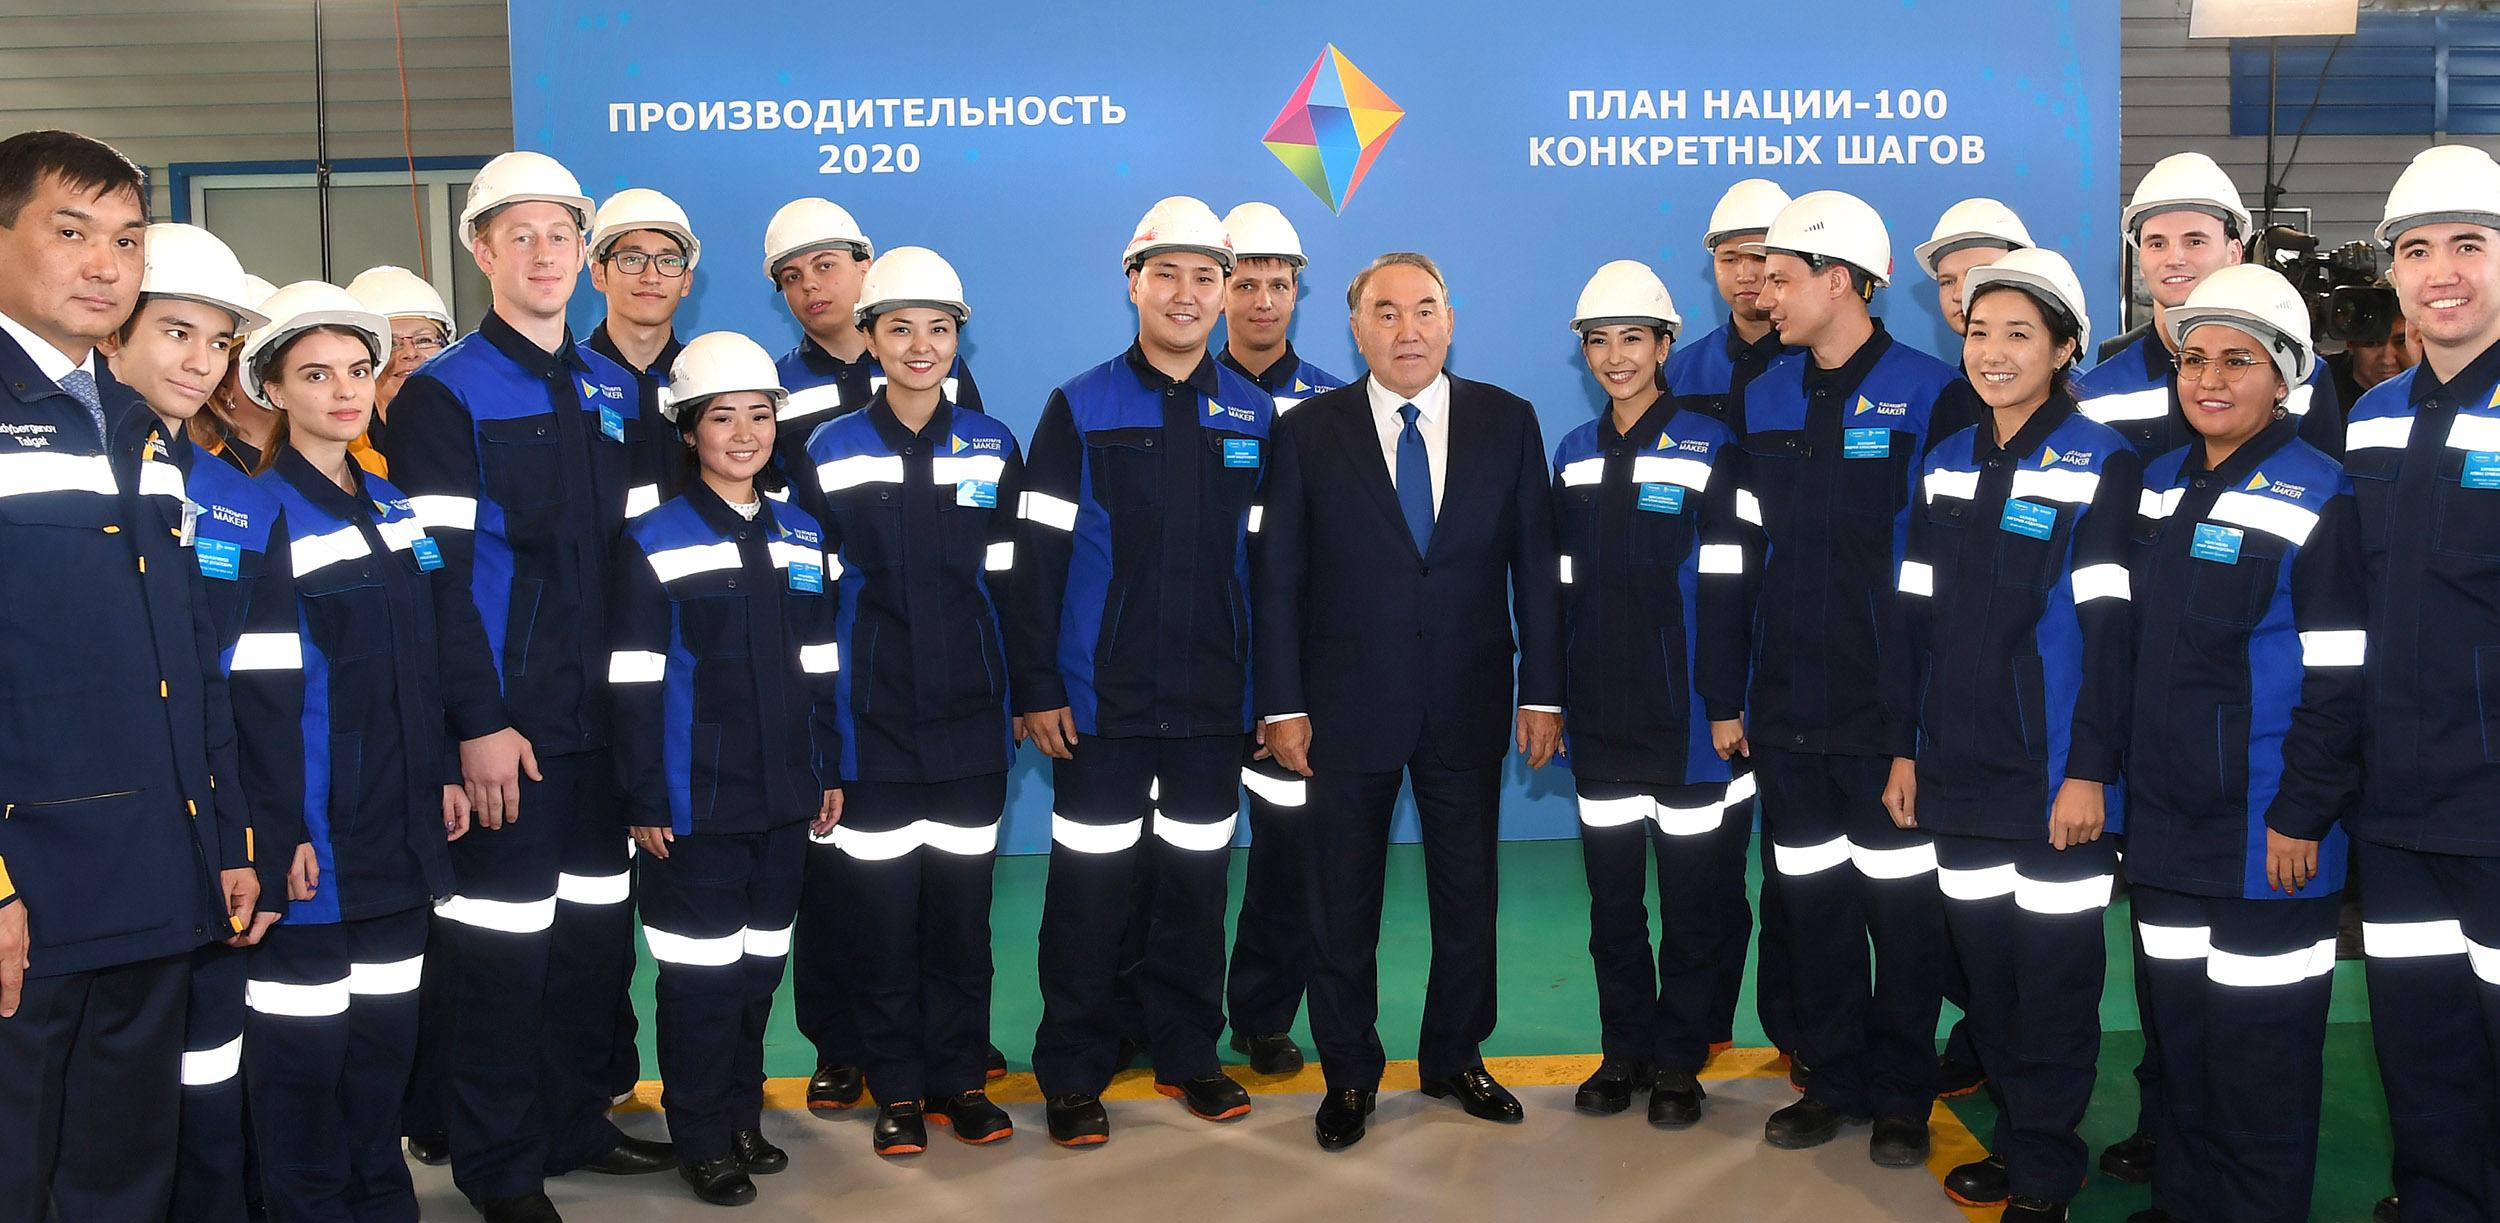 Kazakh President visits the Karagandy Foundry and Machine-Building Plant LLP Maker